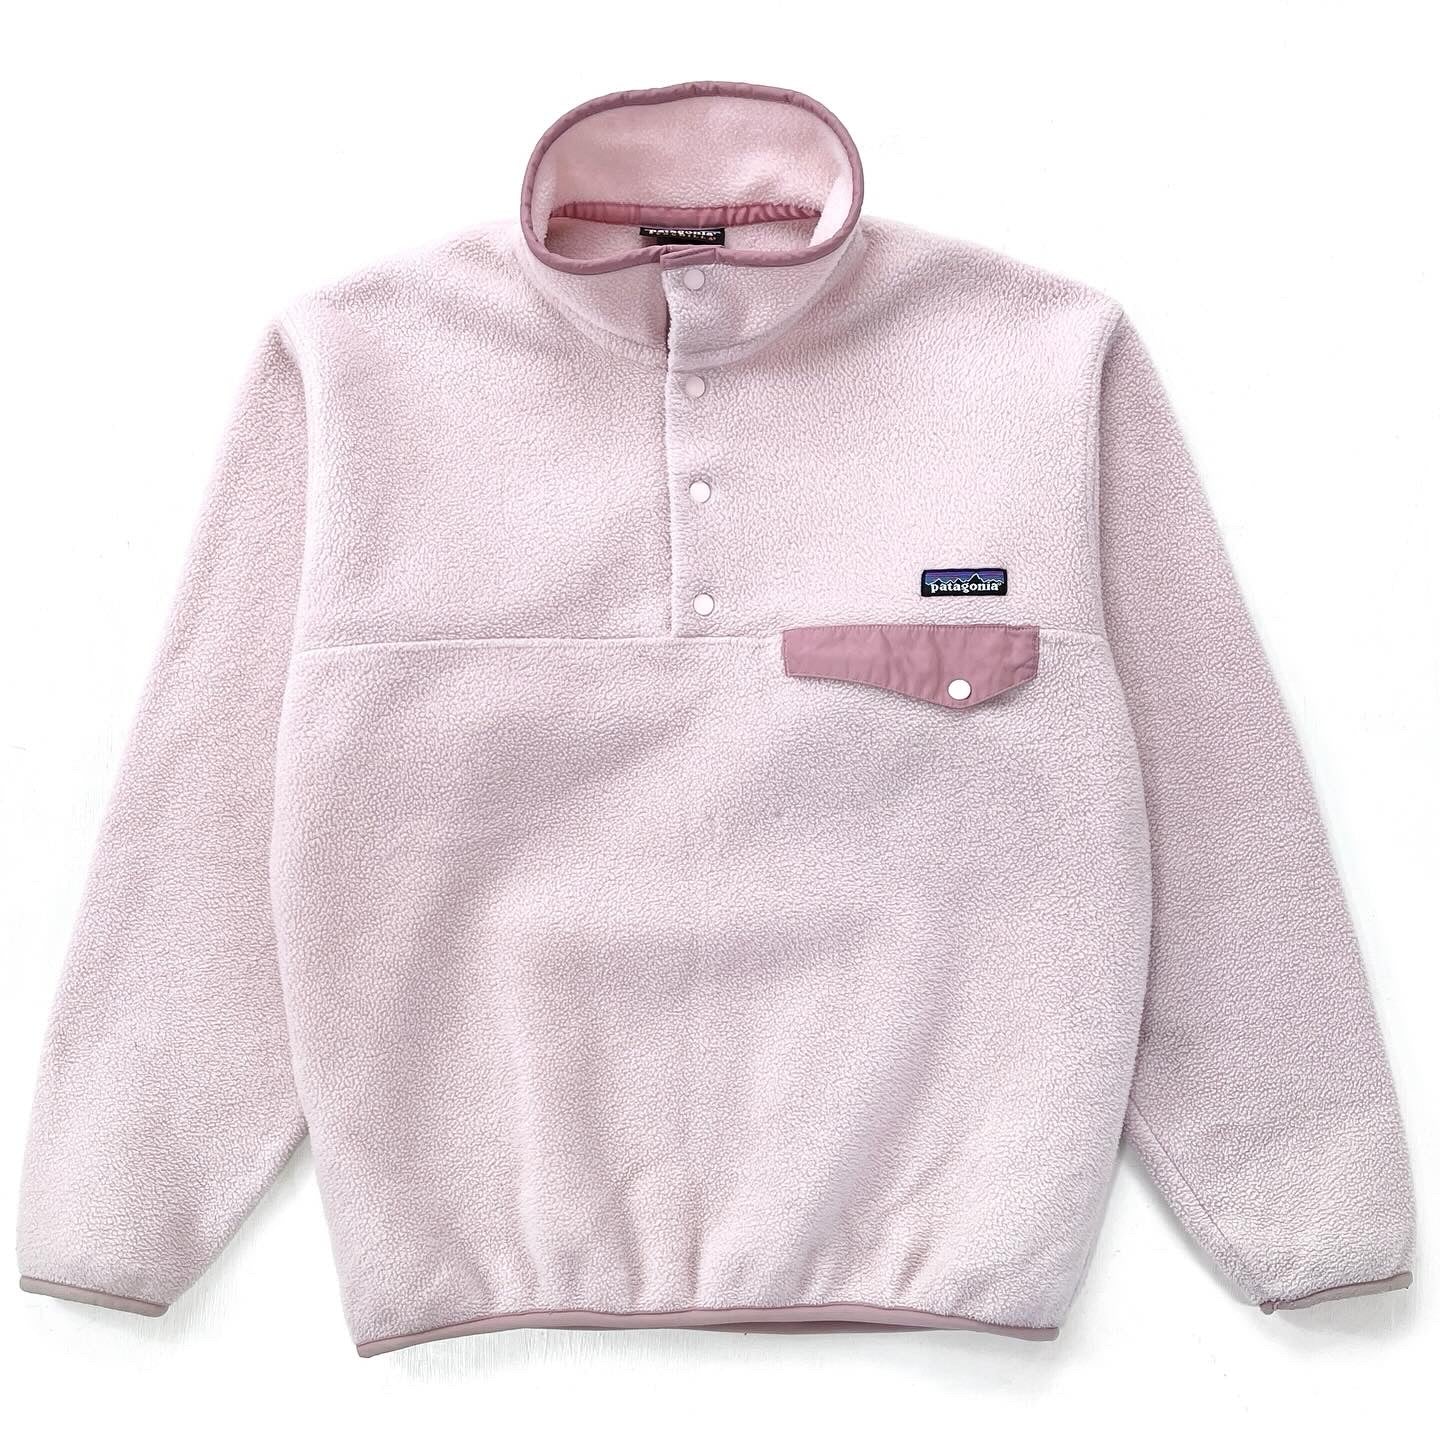 2005 Patagonia Synchilla Snap-T Fleece Pullover, Light Pink (S)